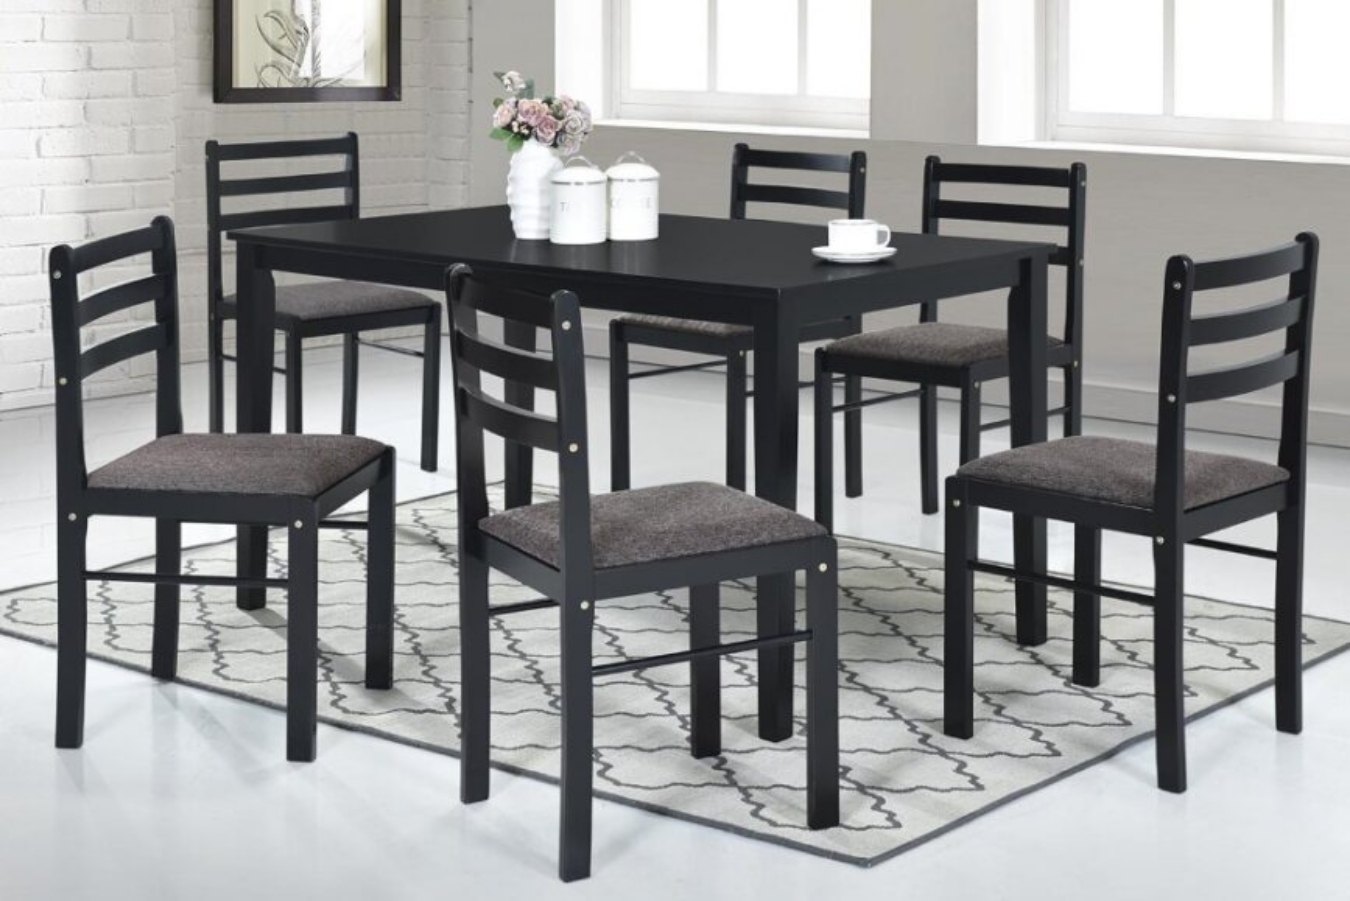 If you need a dining set that’s both versatile and classically stylish, look no further than the Concord Dining set.